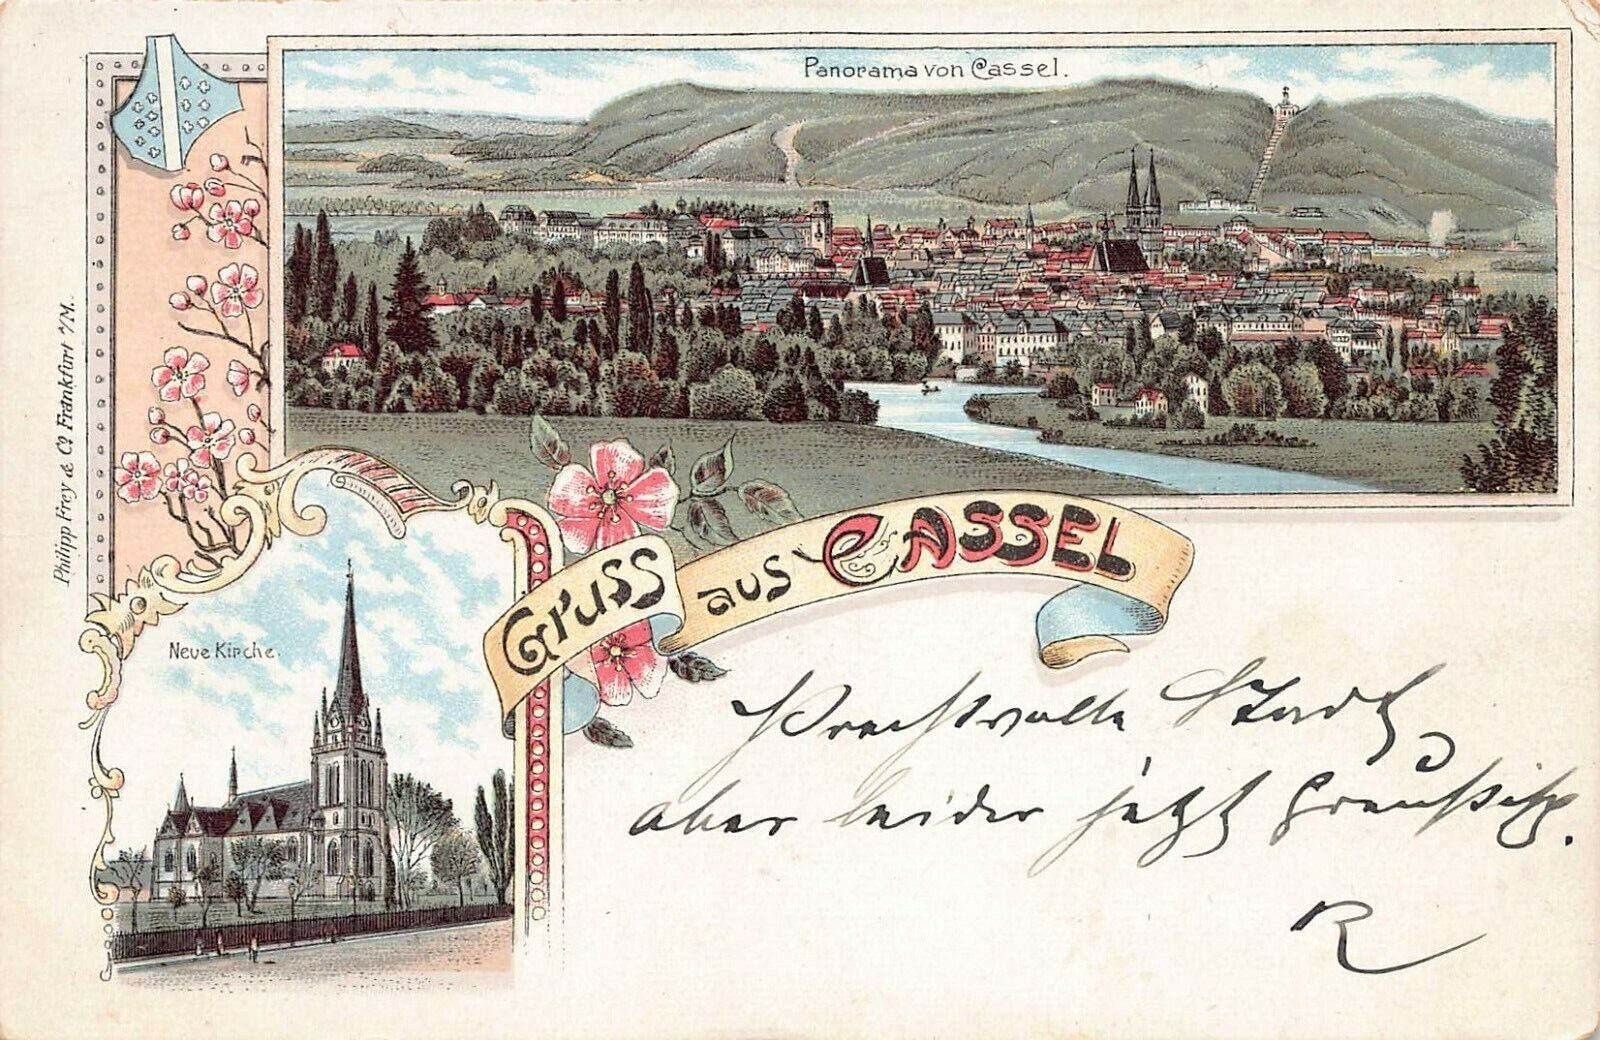 Greetings from Cassel, Germany, Early Postcard, Circa 1900-1905, Unused